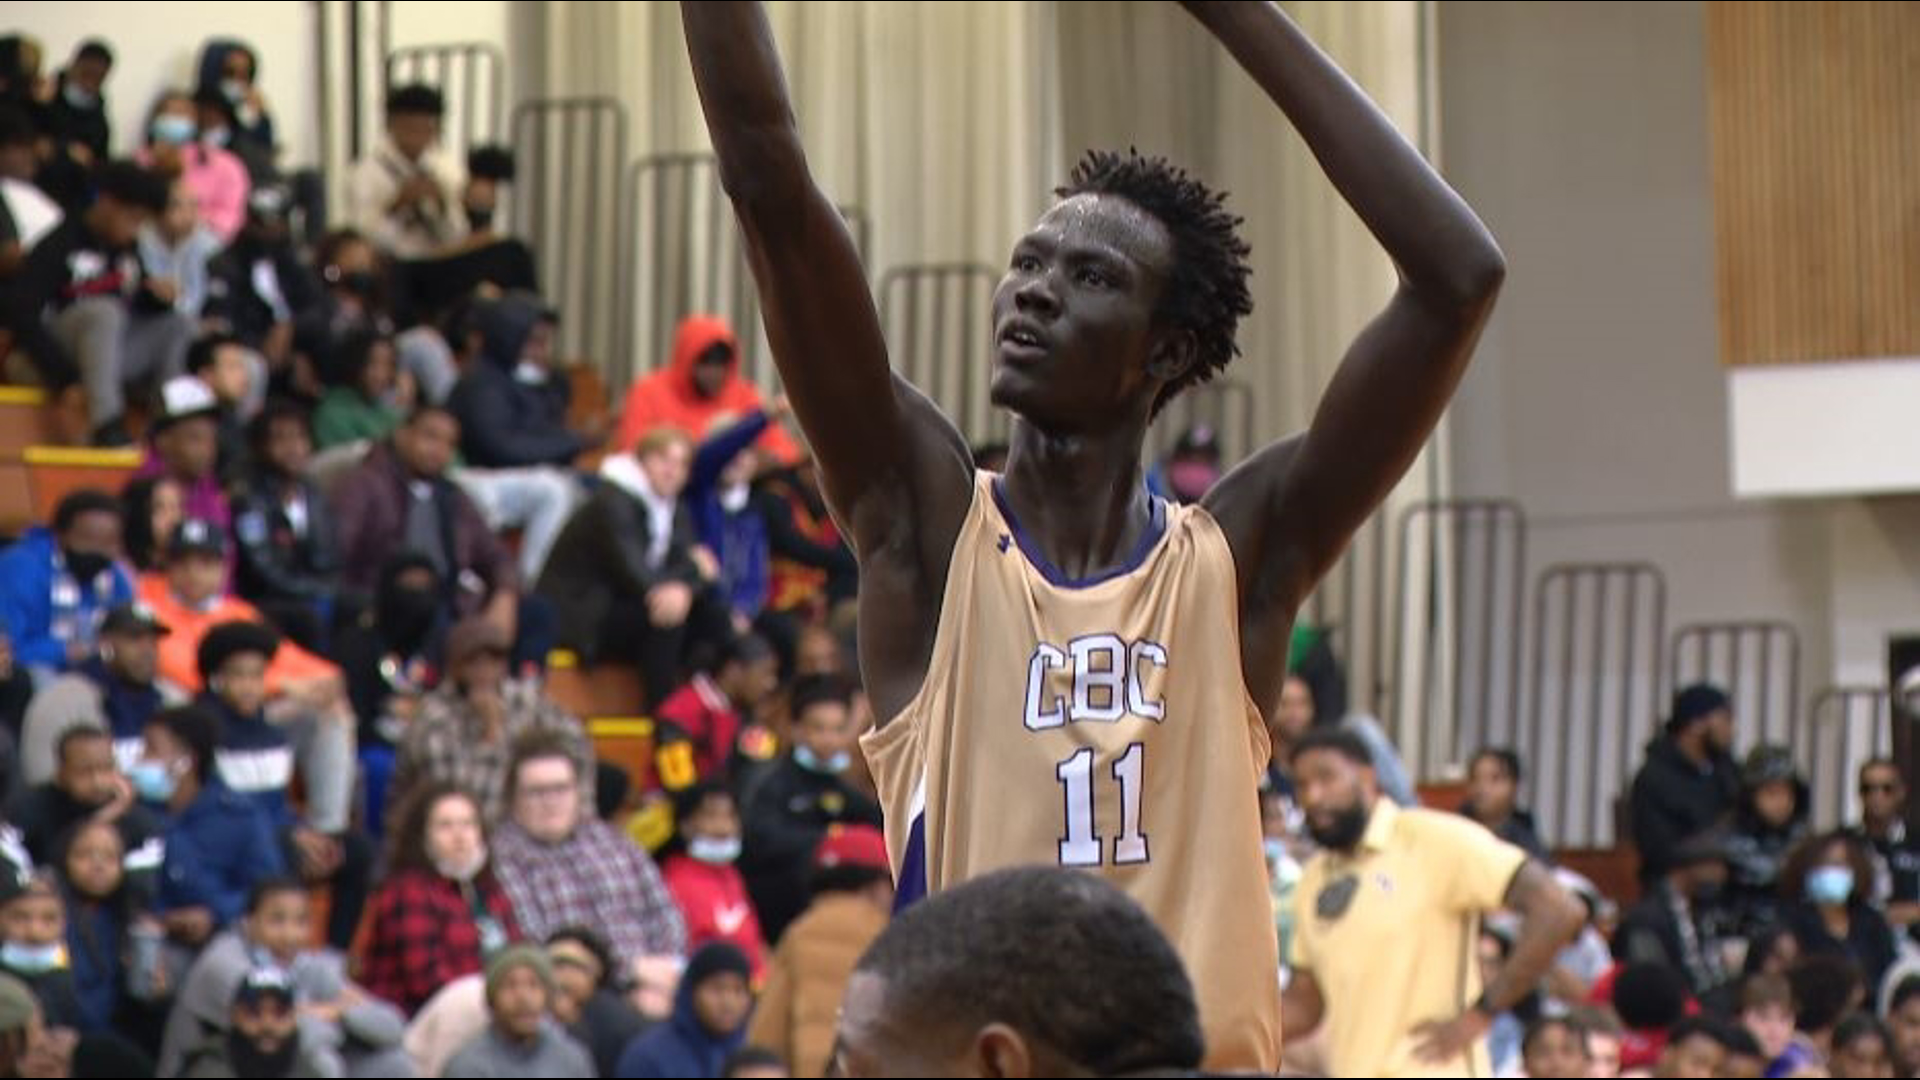 CBC sophomore John Bol averages double-double in first high school basketball season